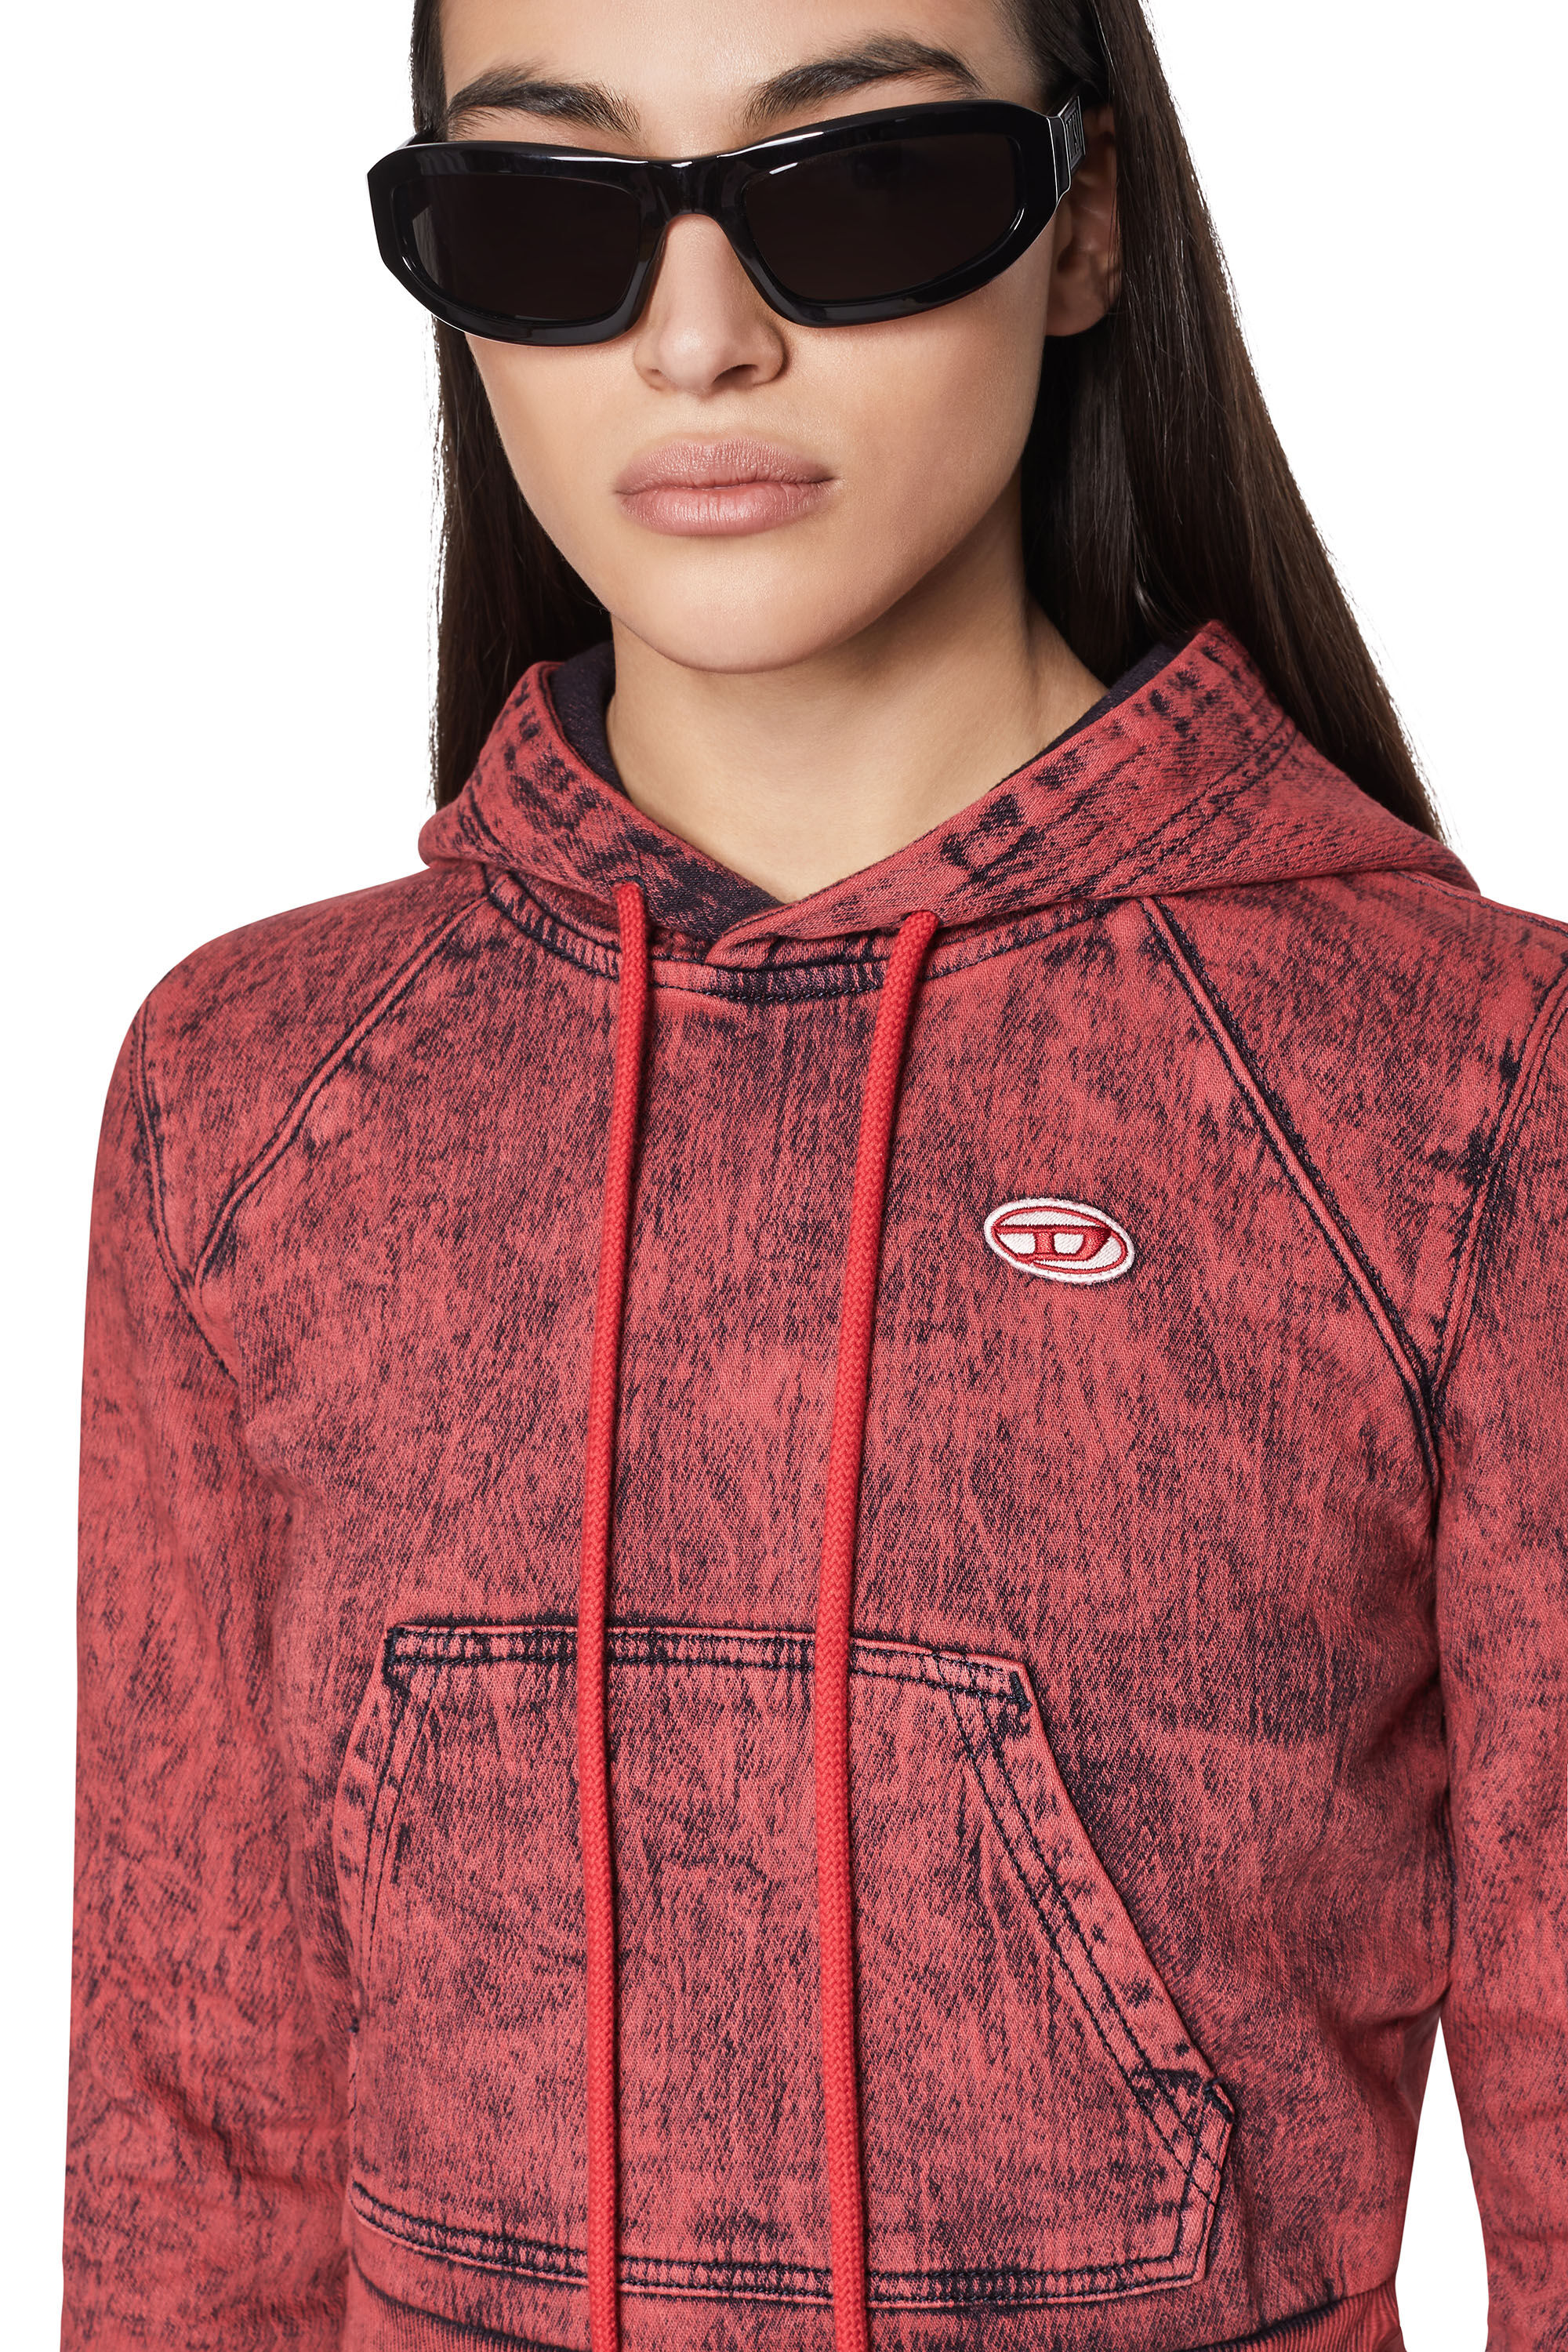 Diesel - D-ANGY-HOOD FS TRACK DENIM, Rosso - Image 5